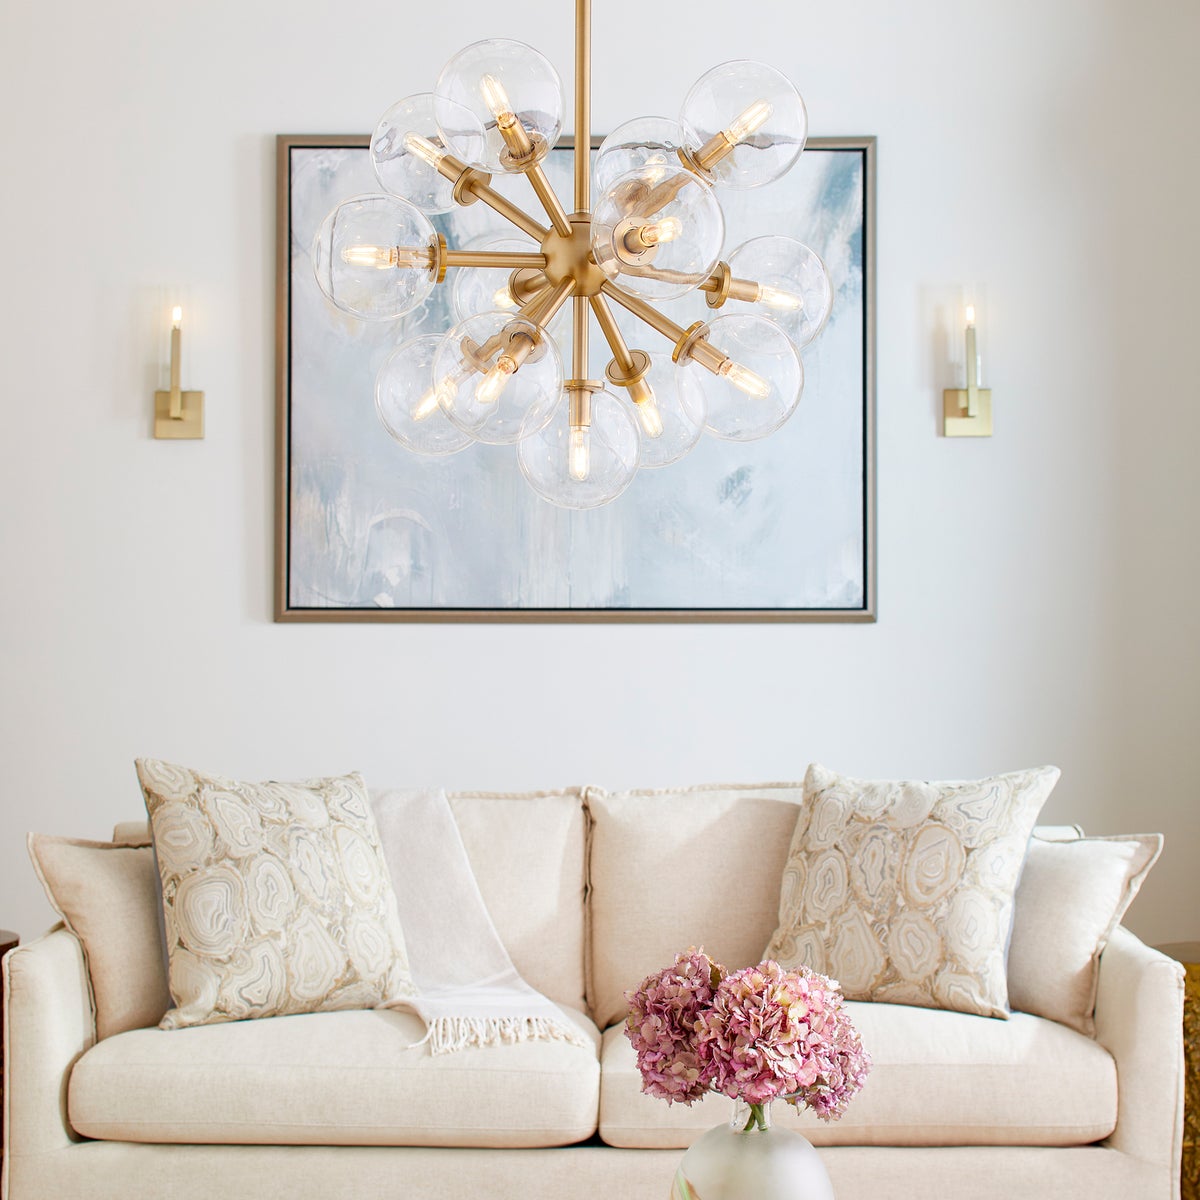 Sputnik chandelier with clear glass domes and aged brass frames, adding mid-century modern appeal. Dramatic and charming design with 13 candelabra E12 bulbs (60W, not included). UL Listed for damp locations. Dimensions: 26"W x 22"H. 2-year warranty.